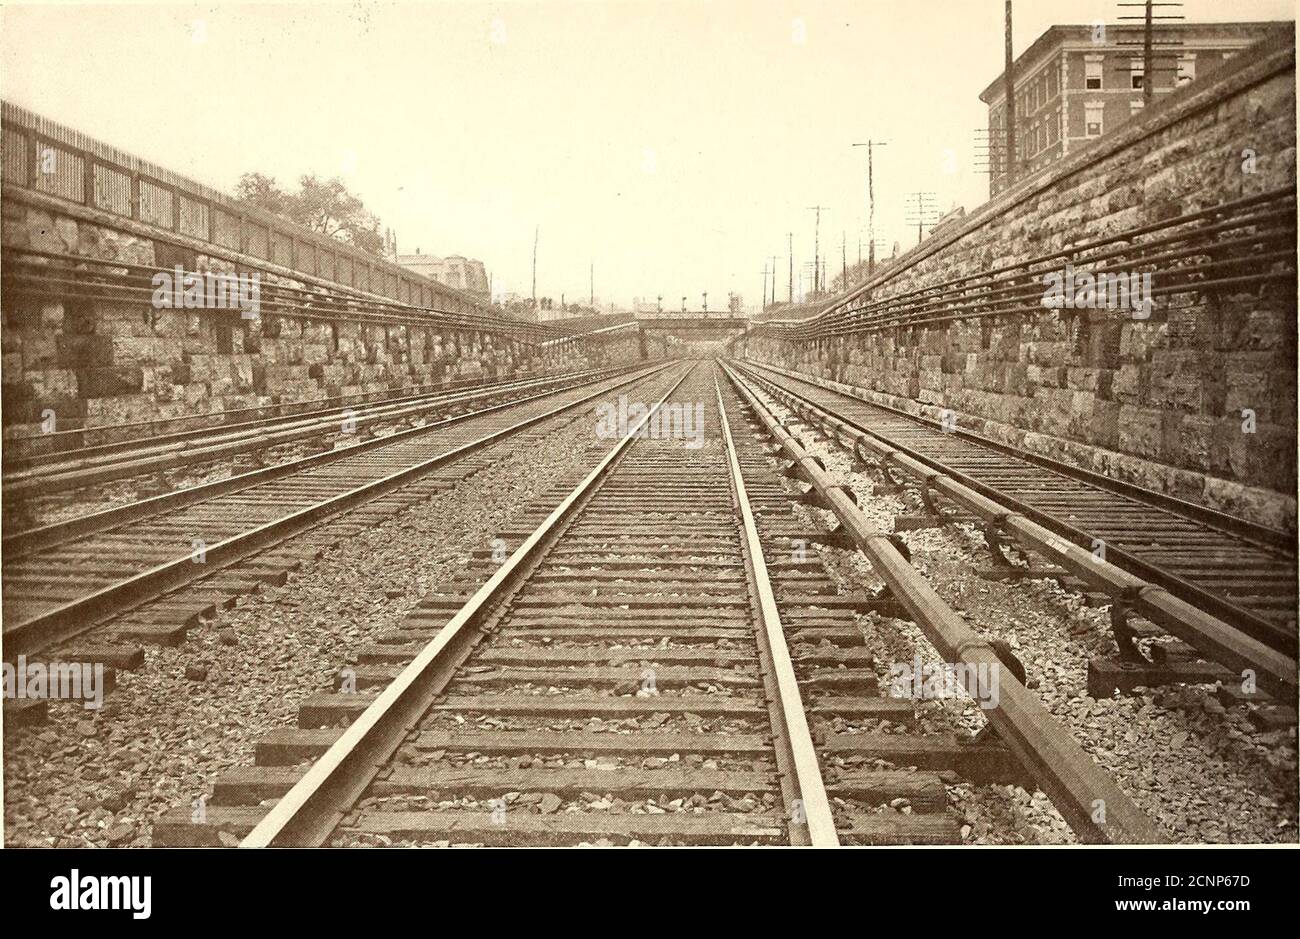 . The Street railway journal . TYPICAL SECTION OF ELECTRIC ZONE, HUDSON DIVISION, NEW YORK CENTRAL RAILROAD Plate XIV. THIRD-RAIL CONSTRUCTION IN HARLEM CUT, NEW YORin CENTRAL RAILROAD Stock Photo